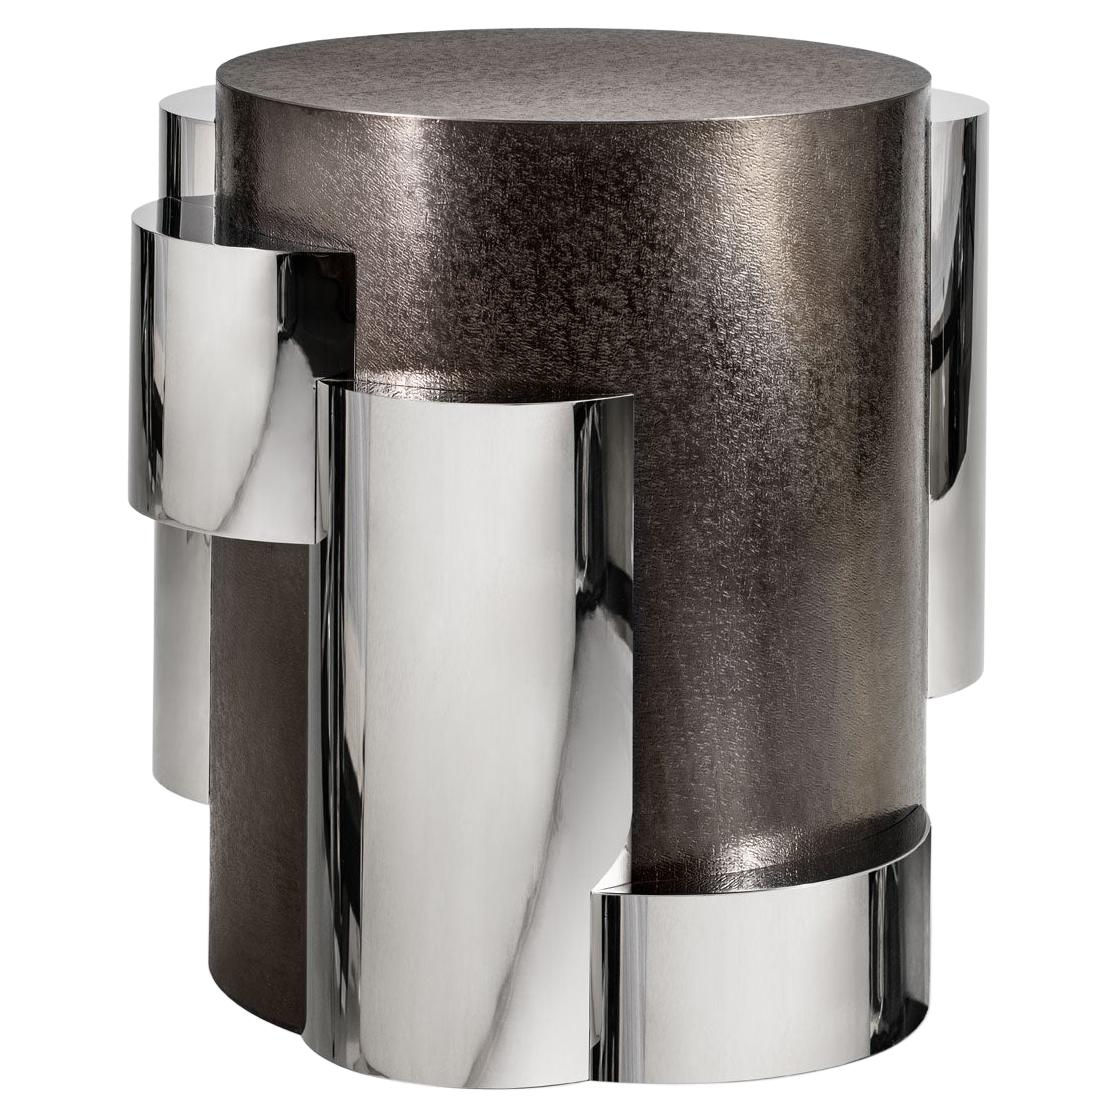 Garrido Cilindros Side Table in Anthracite Nickel Finish For Sale